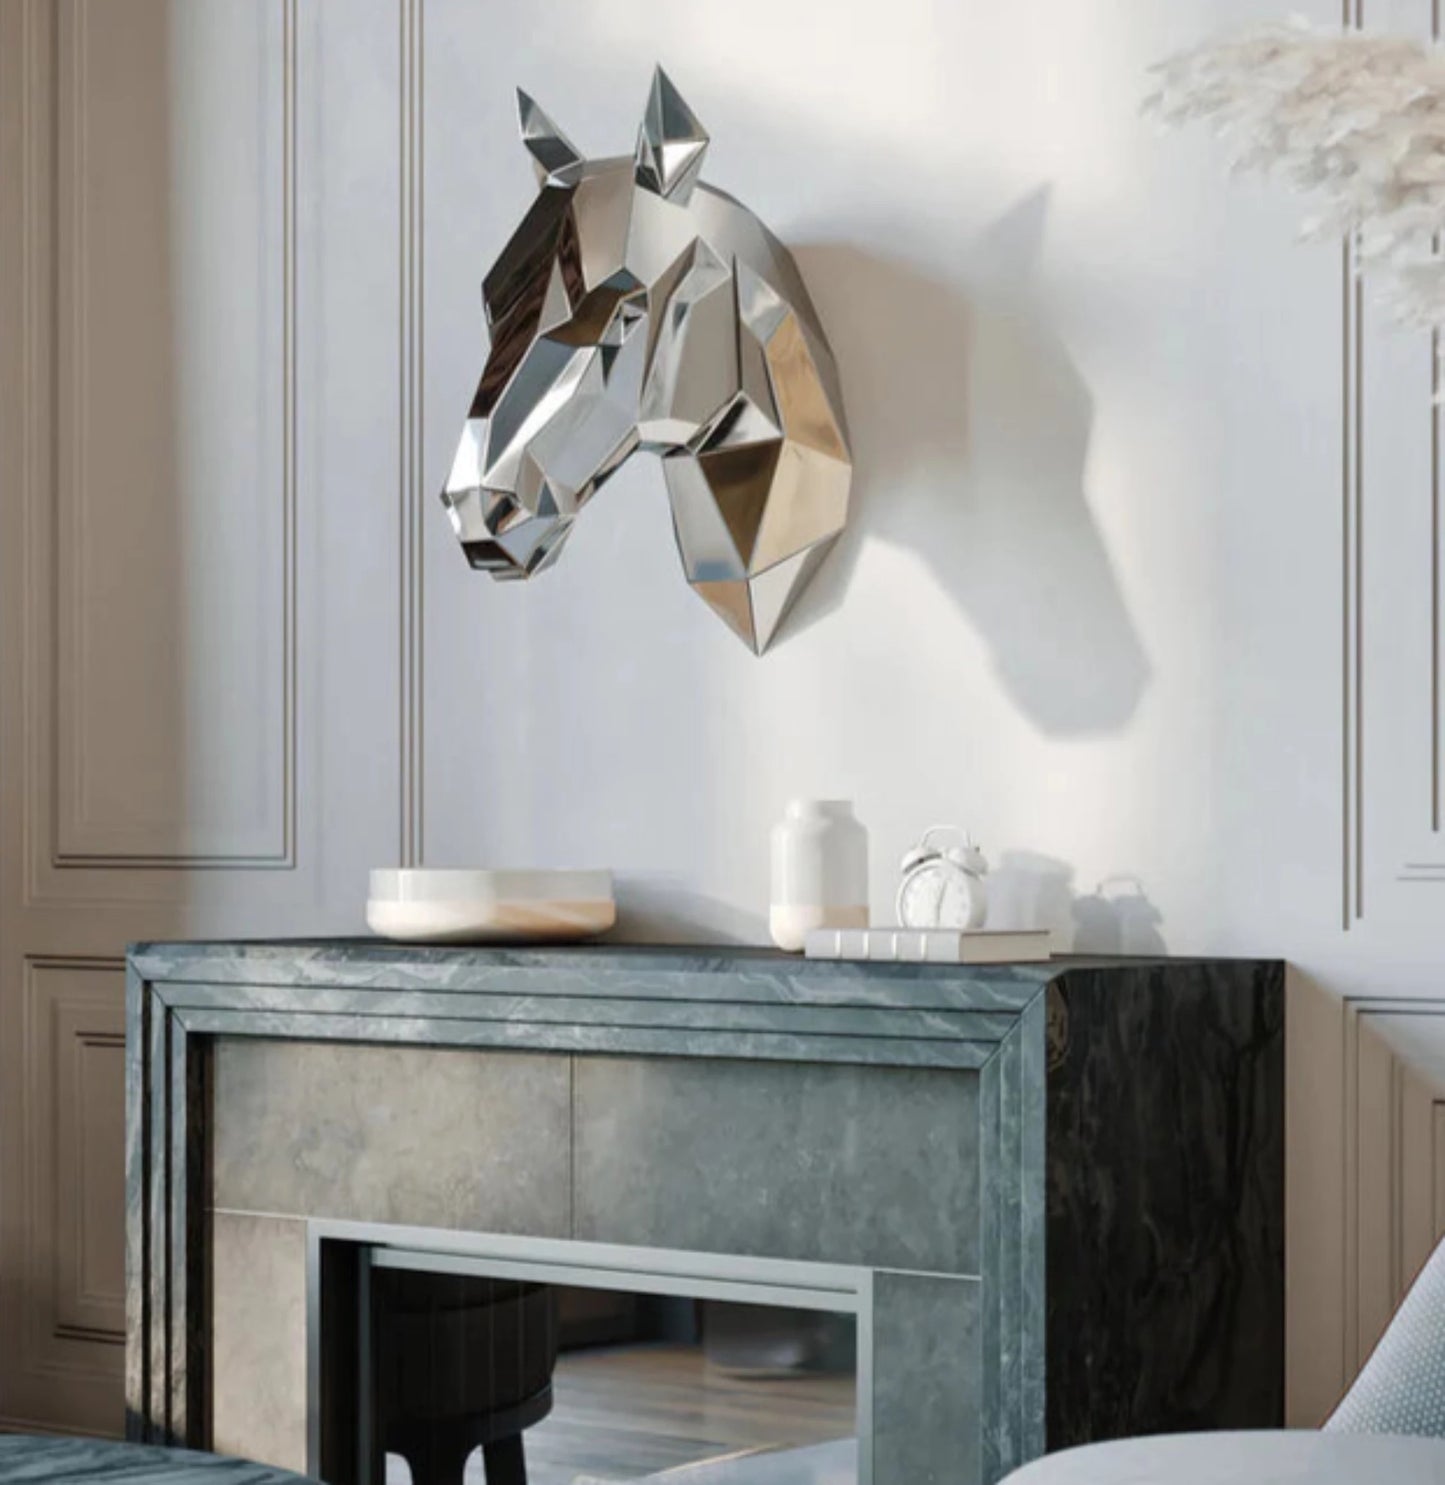 ANDREW K - Mirror Polished Horse Head 61cm